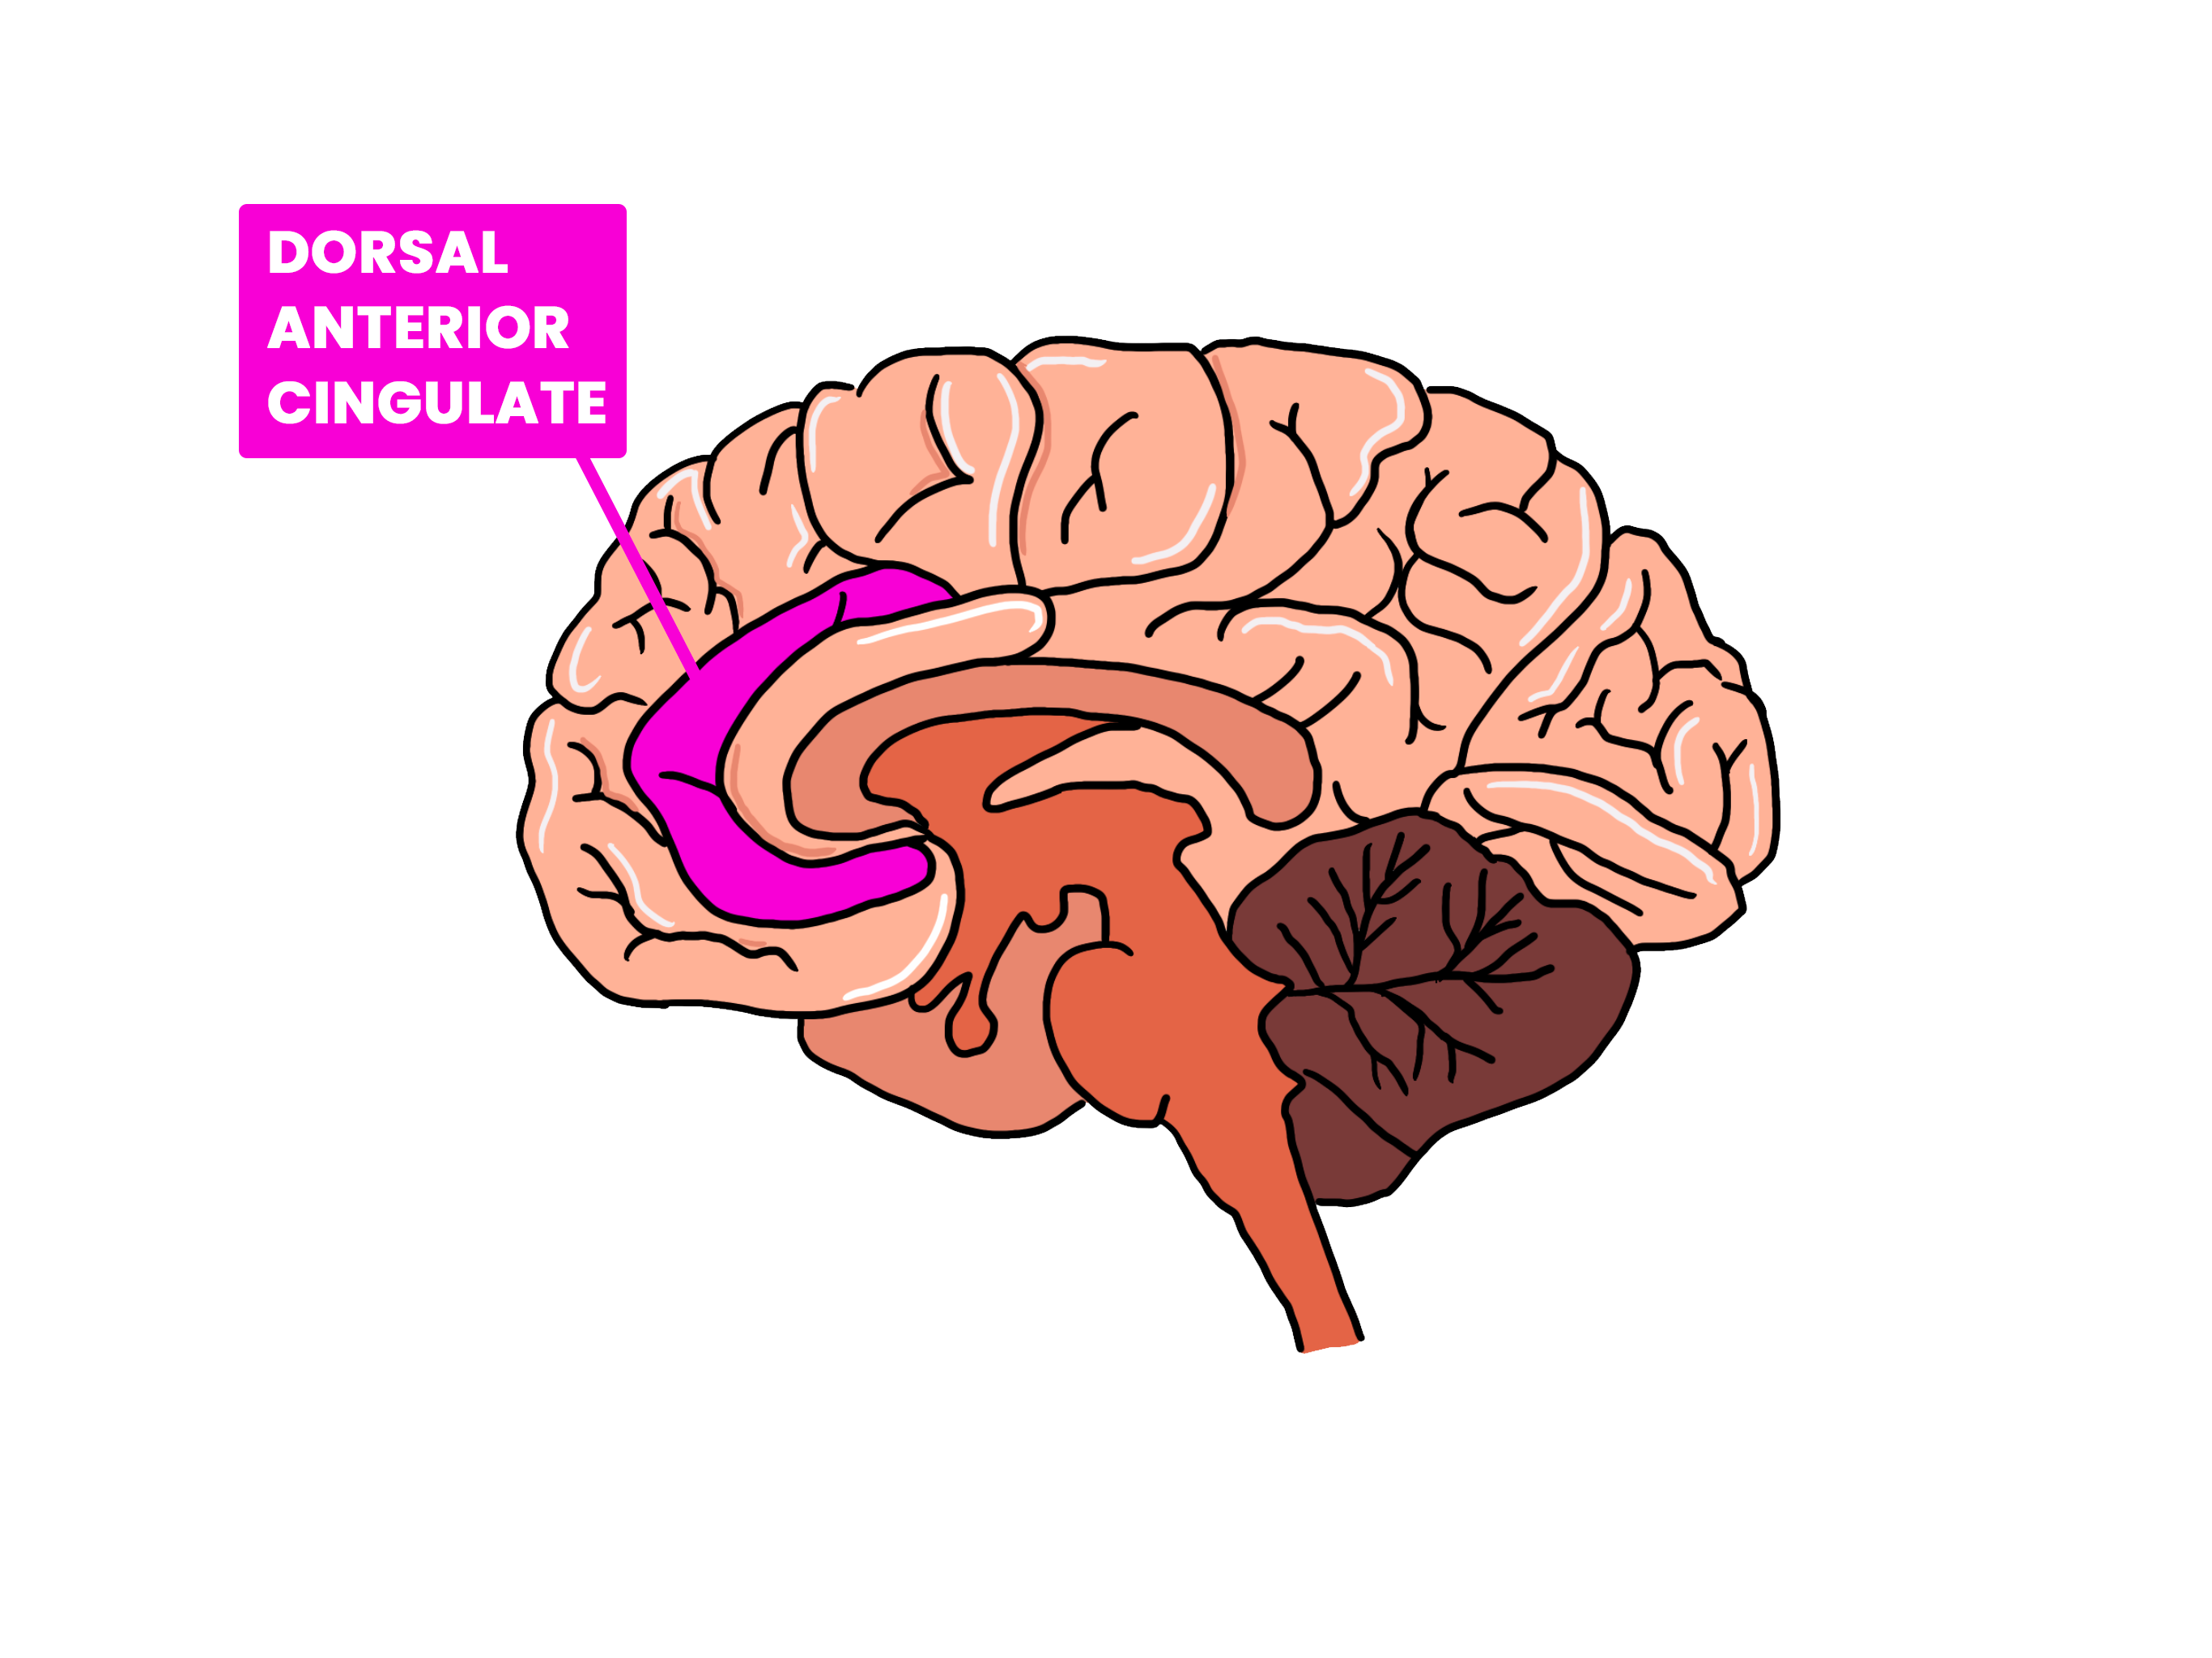 diagram showing how hypnosis & self-hypnosis affects the brain region of the Dorsal-anterior-cingulate